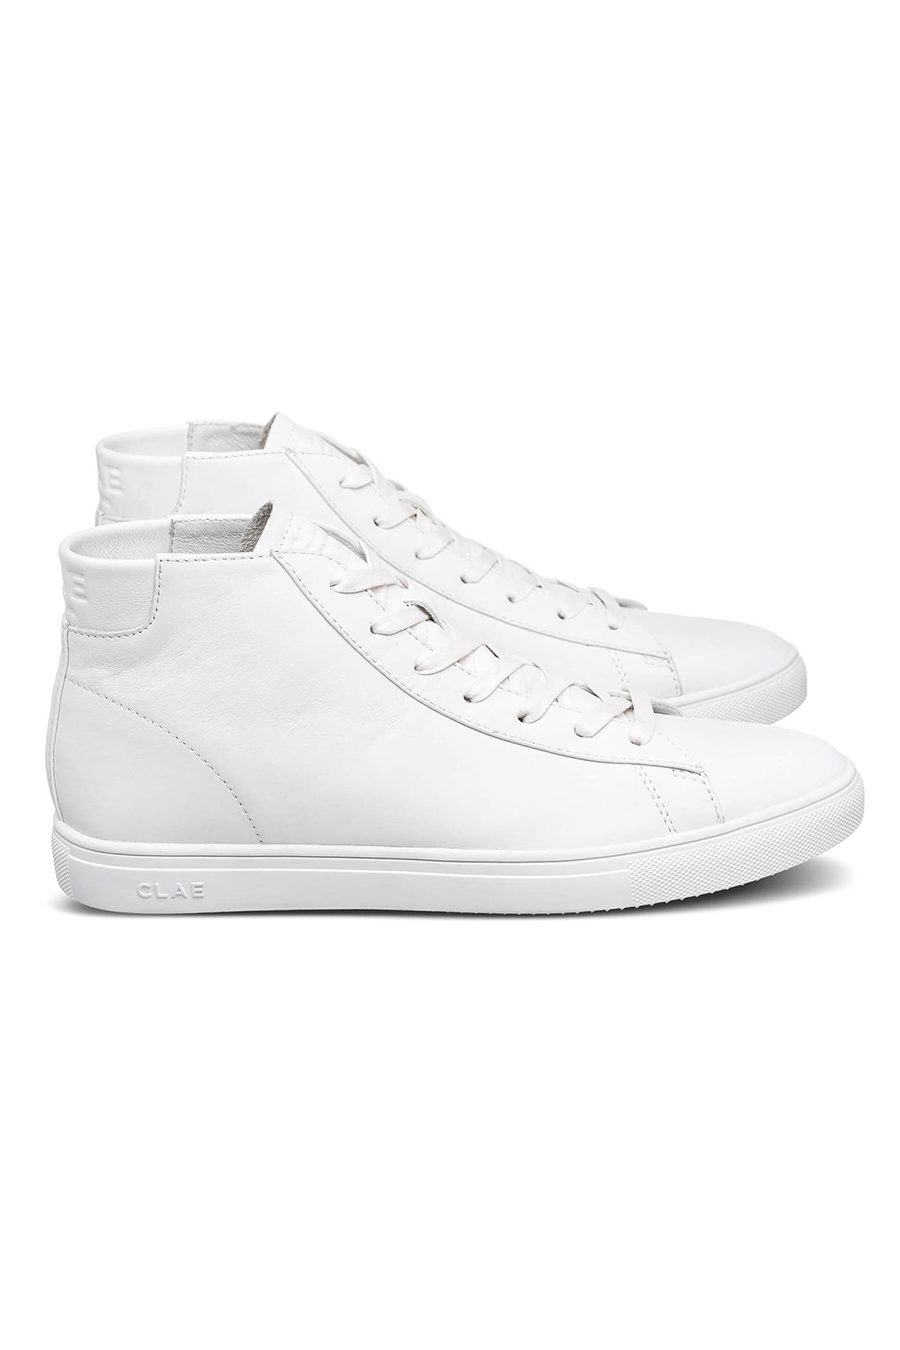 Bradley Mid | Triple White Leather - Main Image Number 1 of 3